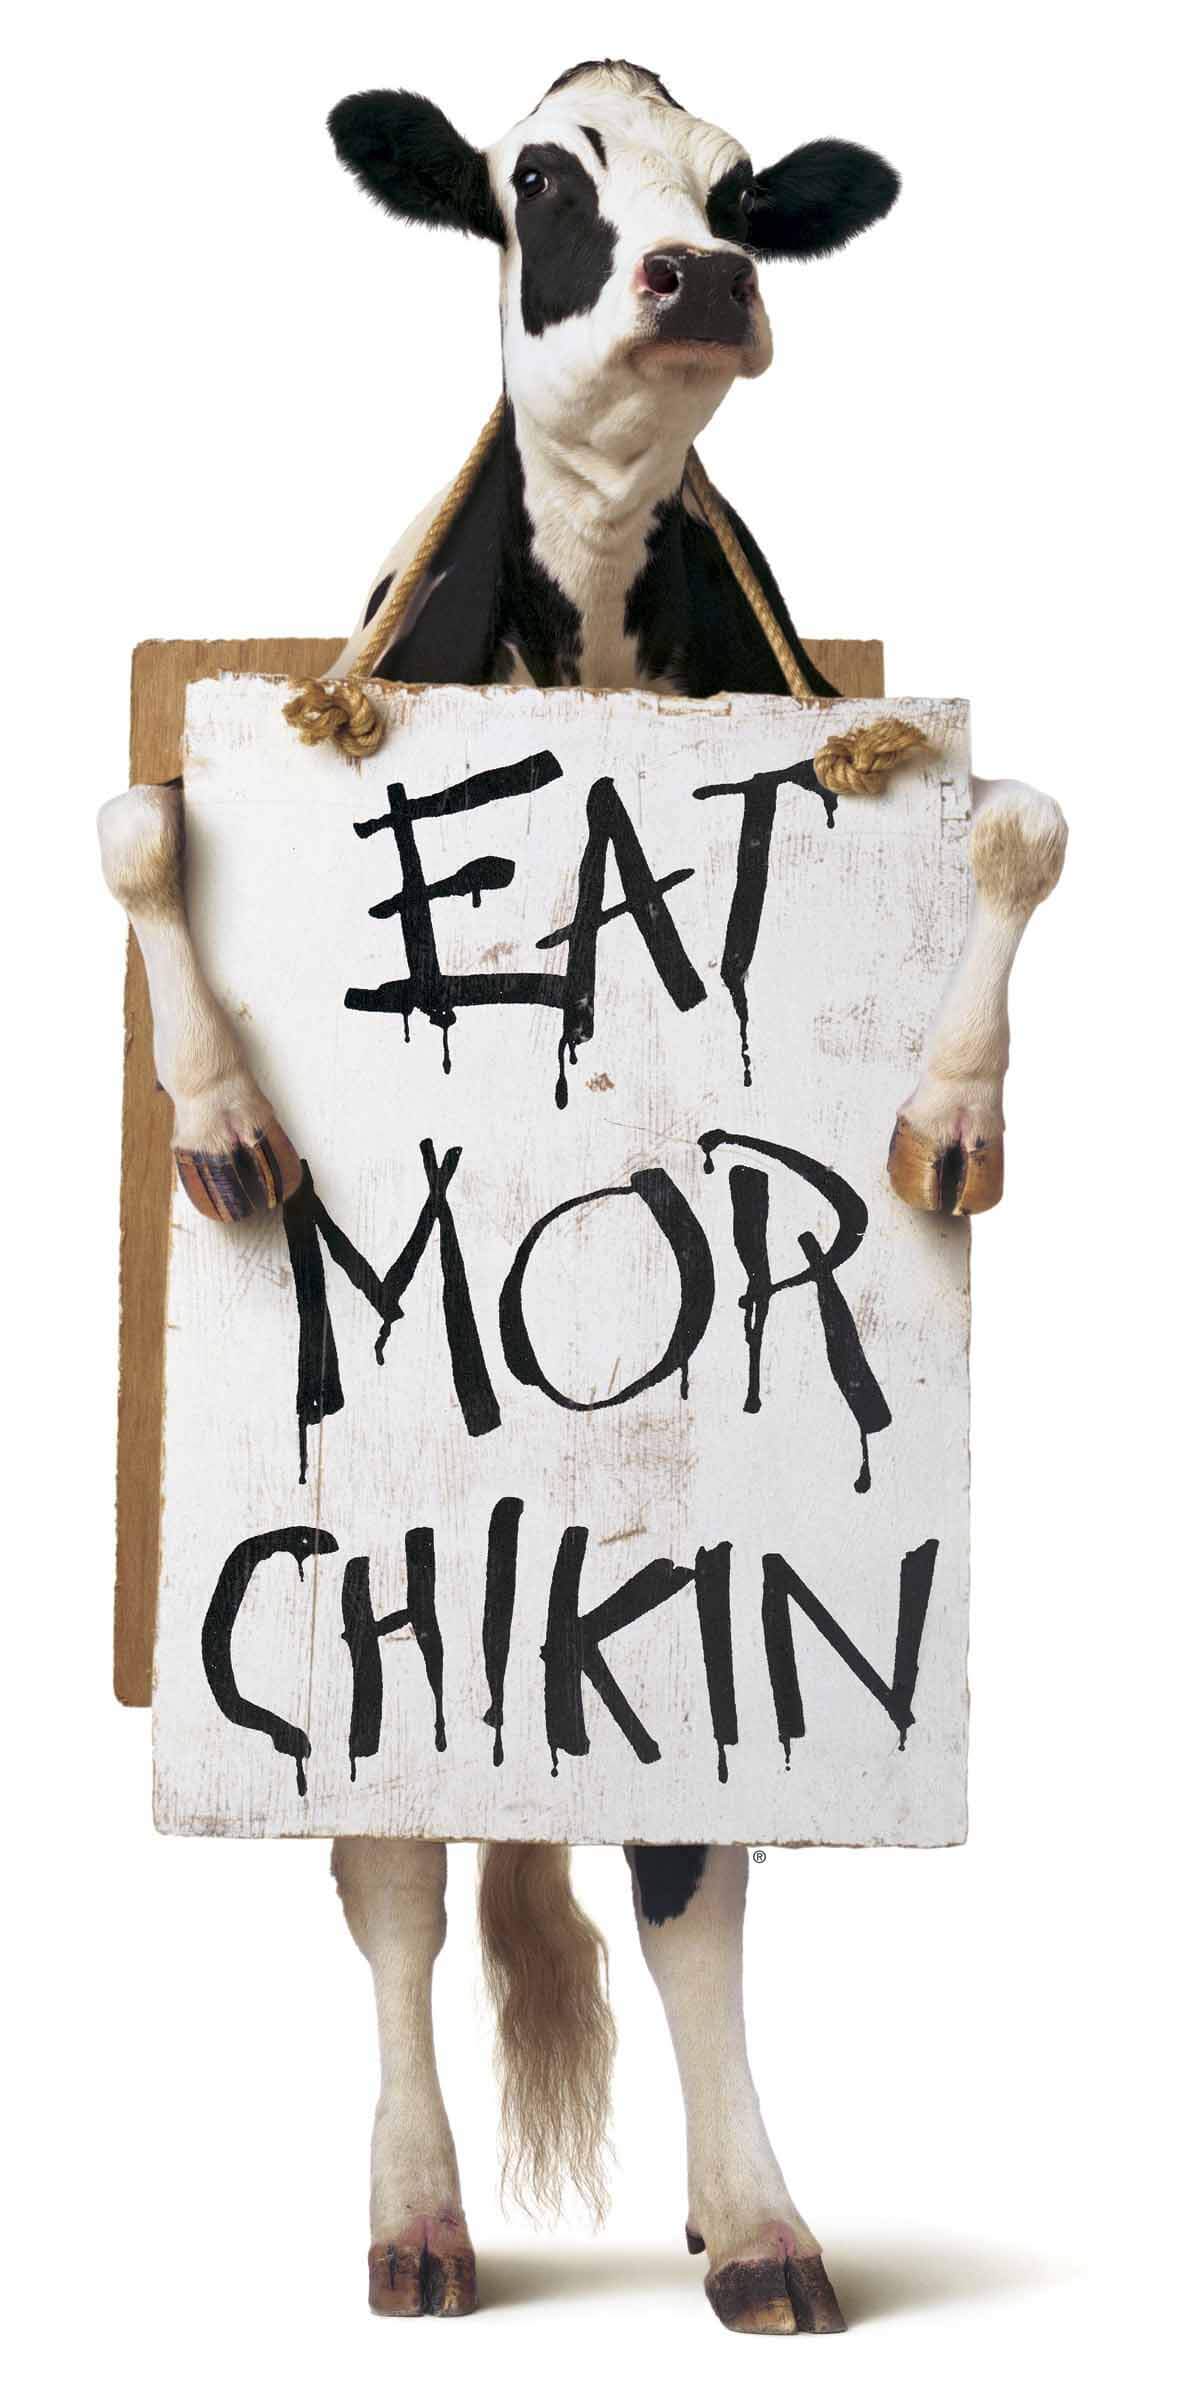 Crisis Communications: How Chick-fil-A Weathered the Storm - Spin Sucks